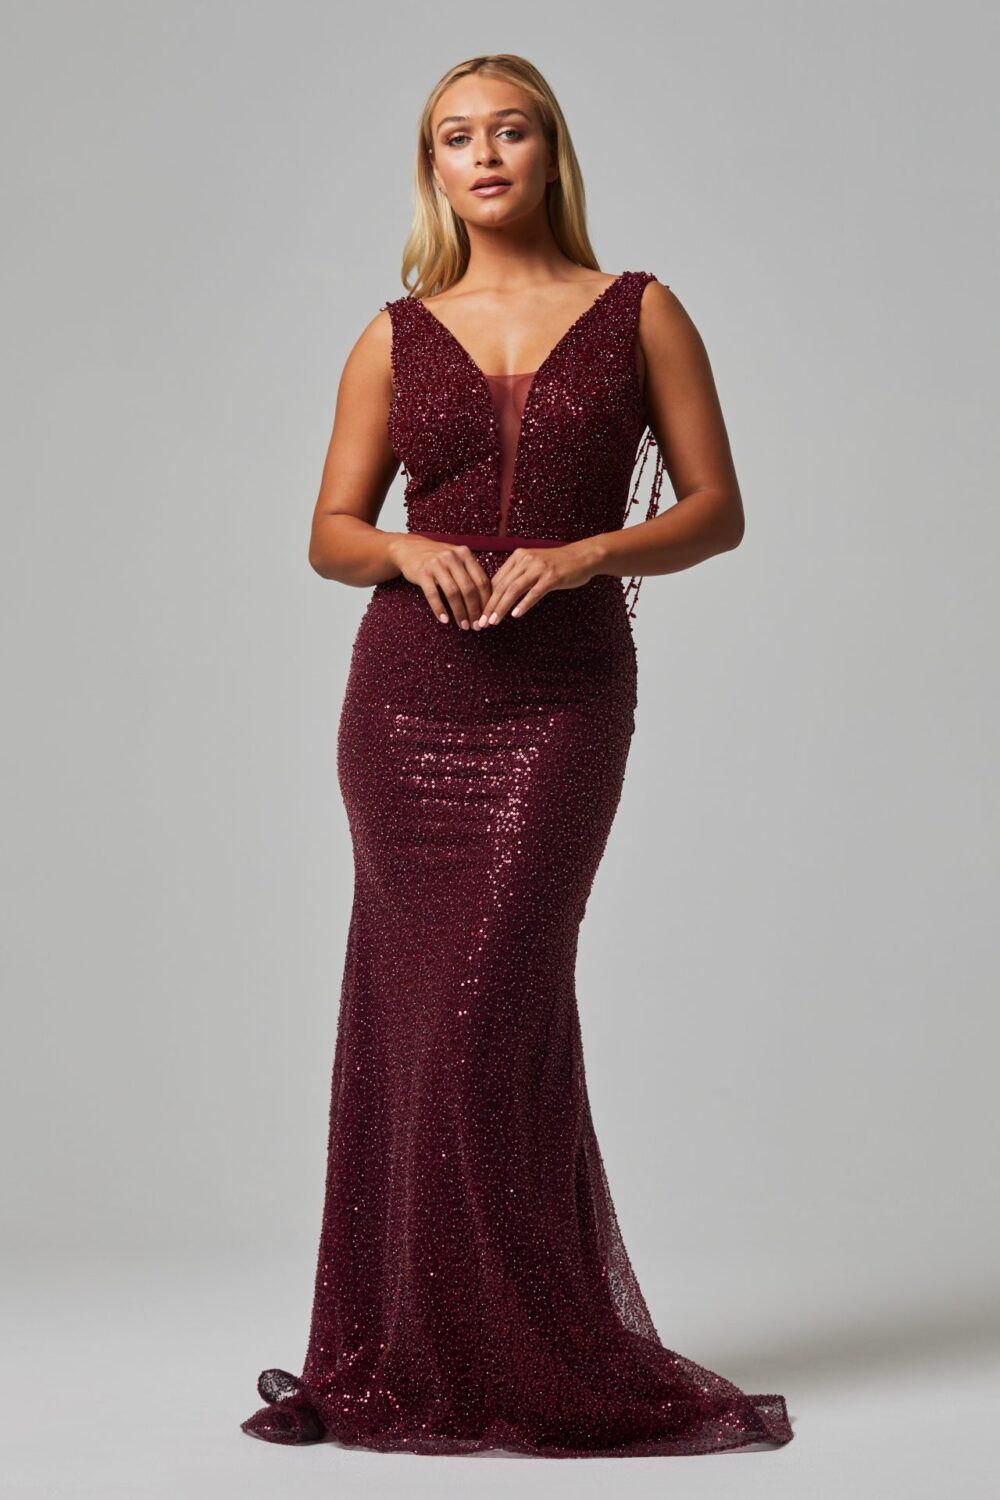 CRYSTAL TC253 2019 Autumn Winter Evening Couture dress by Tania Olsen Designs